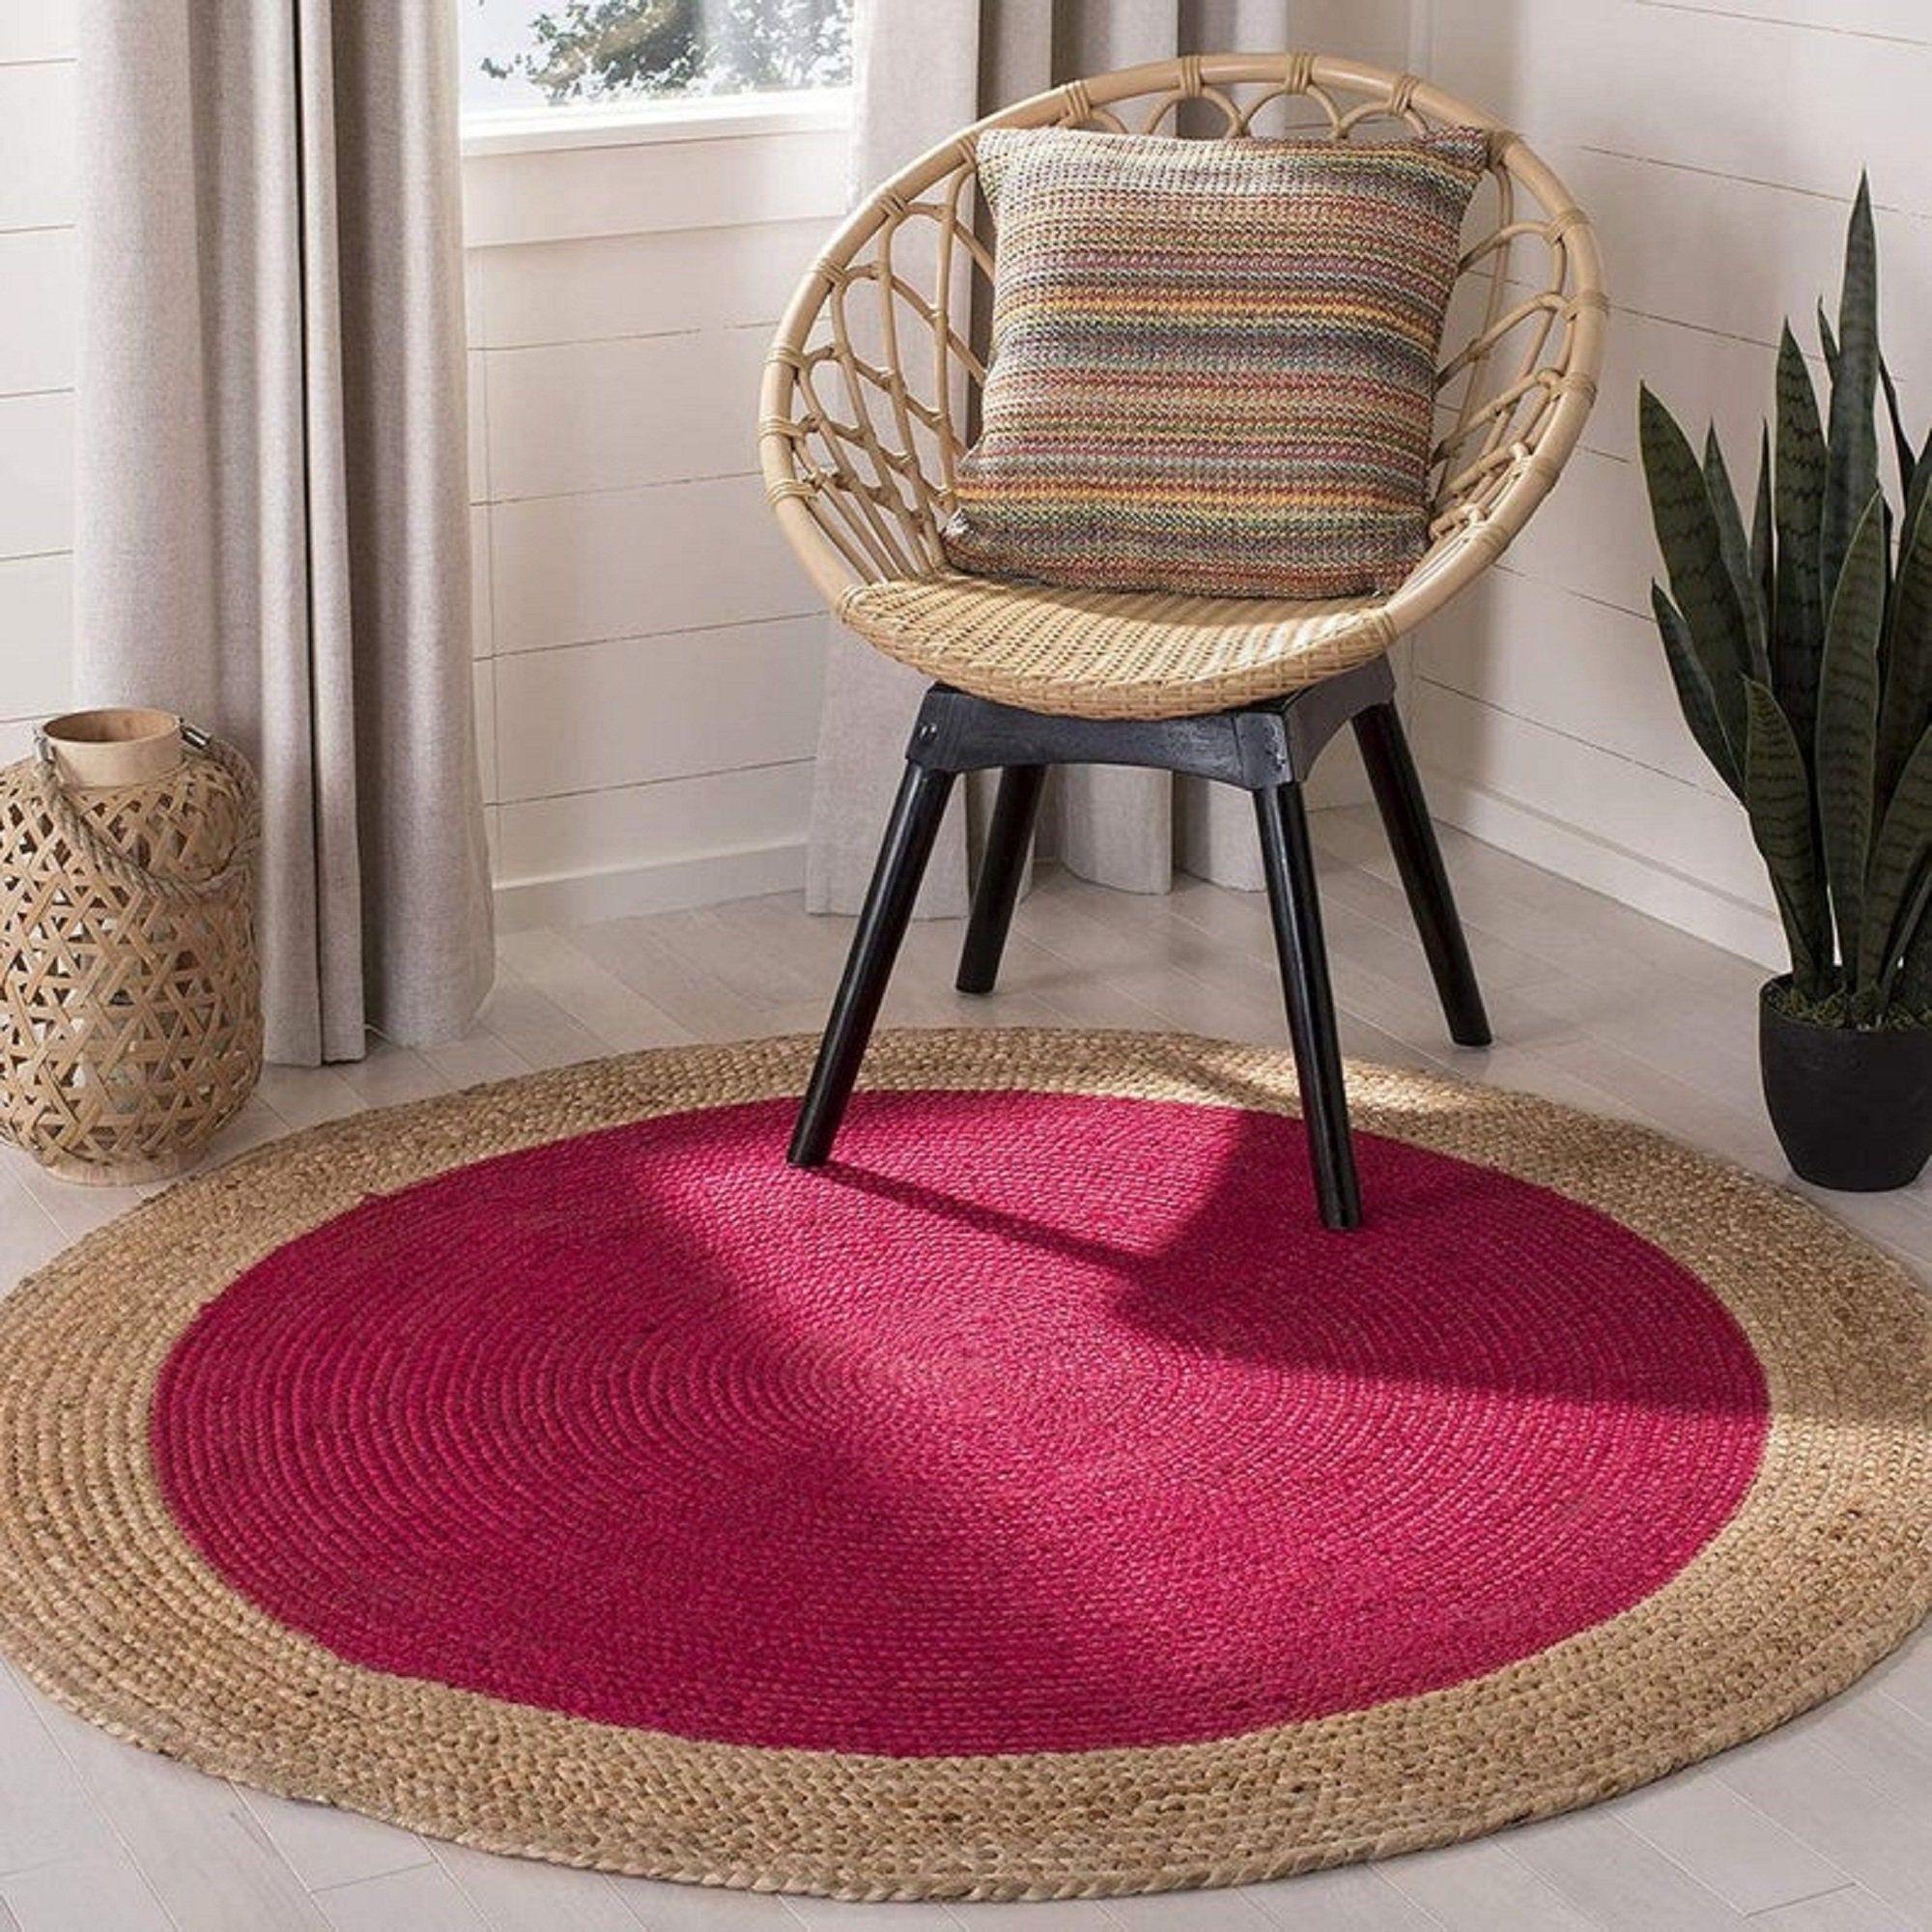 Cotton Jute Round Rugs With Border Indian Handmade & Purely – Etsy Intended For Border Round Rugs (View 11 of 15)